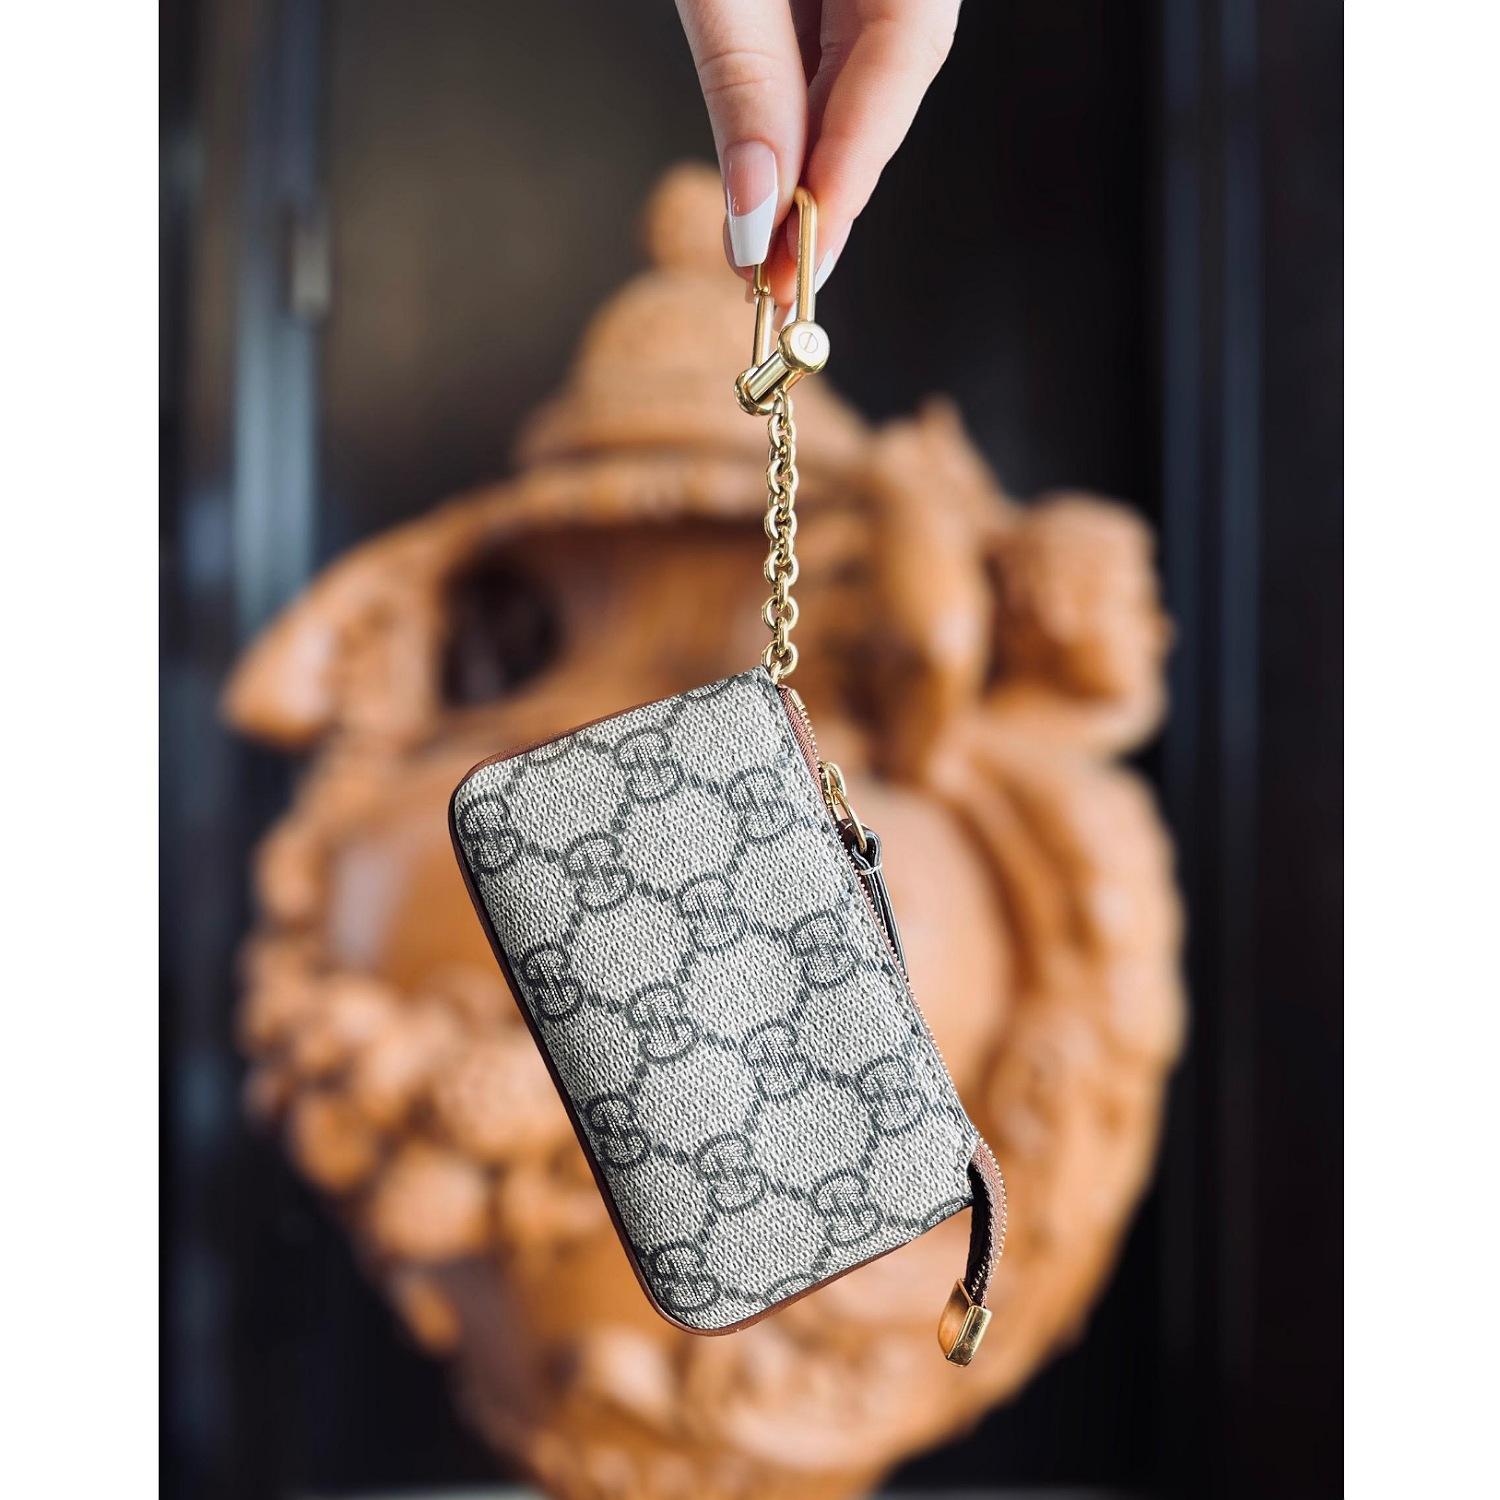 GUCCI GG Supreme Monogram Key Case in Brown. This stylish key case is crafted of Gucci GG monogram-coated canvas with an all-around dark brown leather trim. The case unzips with an overextended zipper to a brown fabric interior featuring a gold